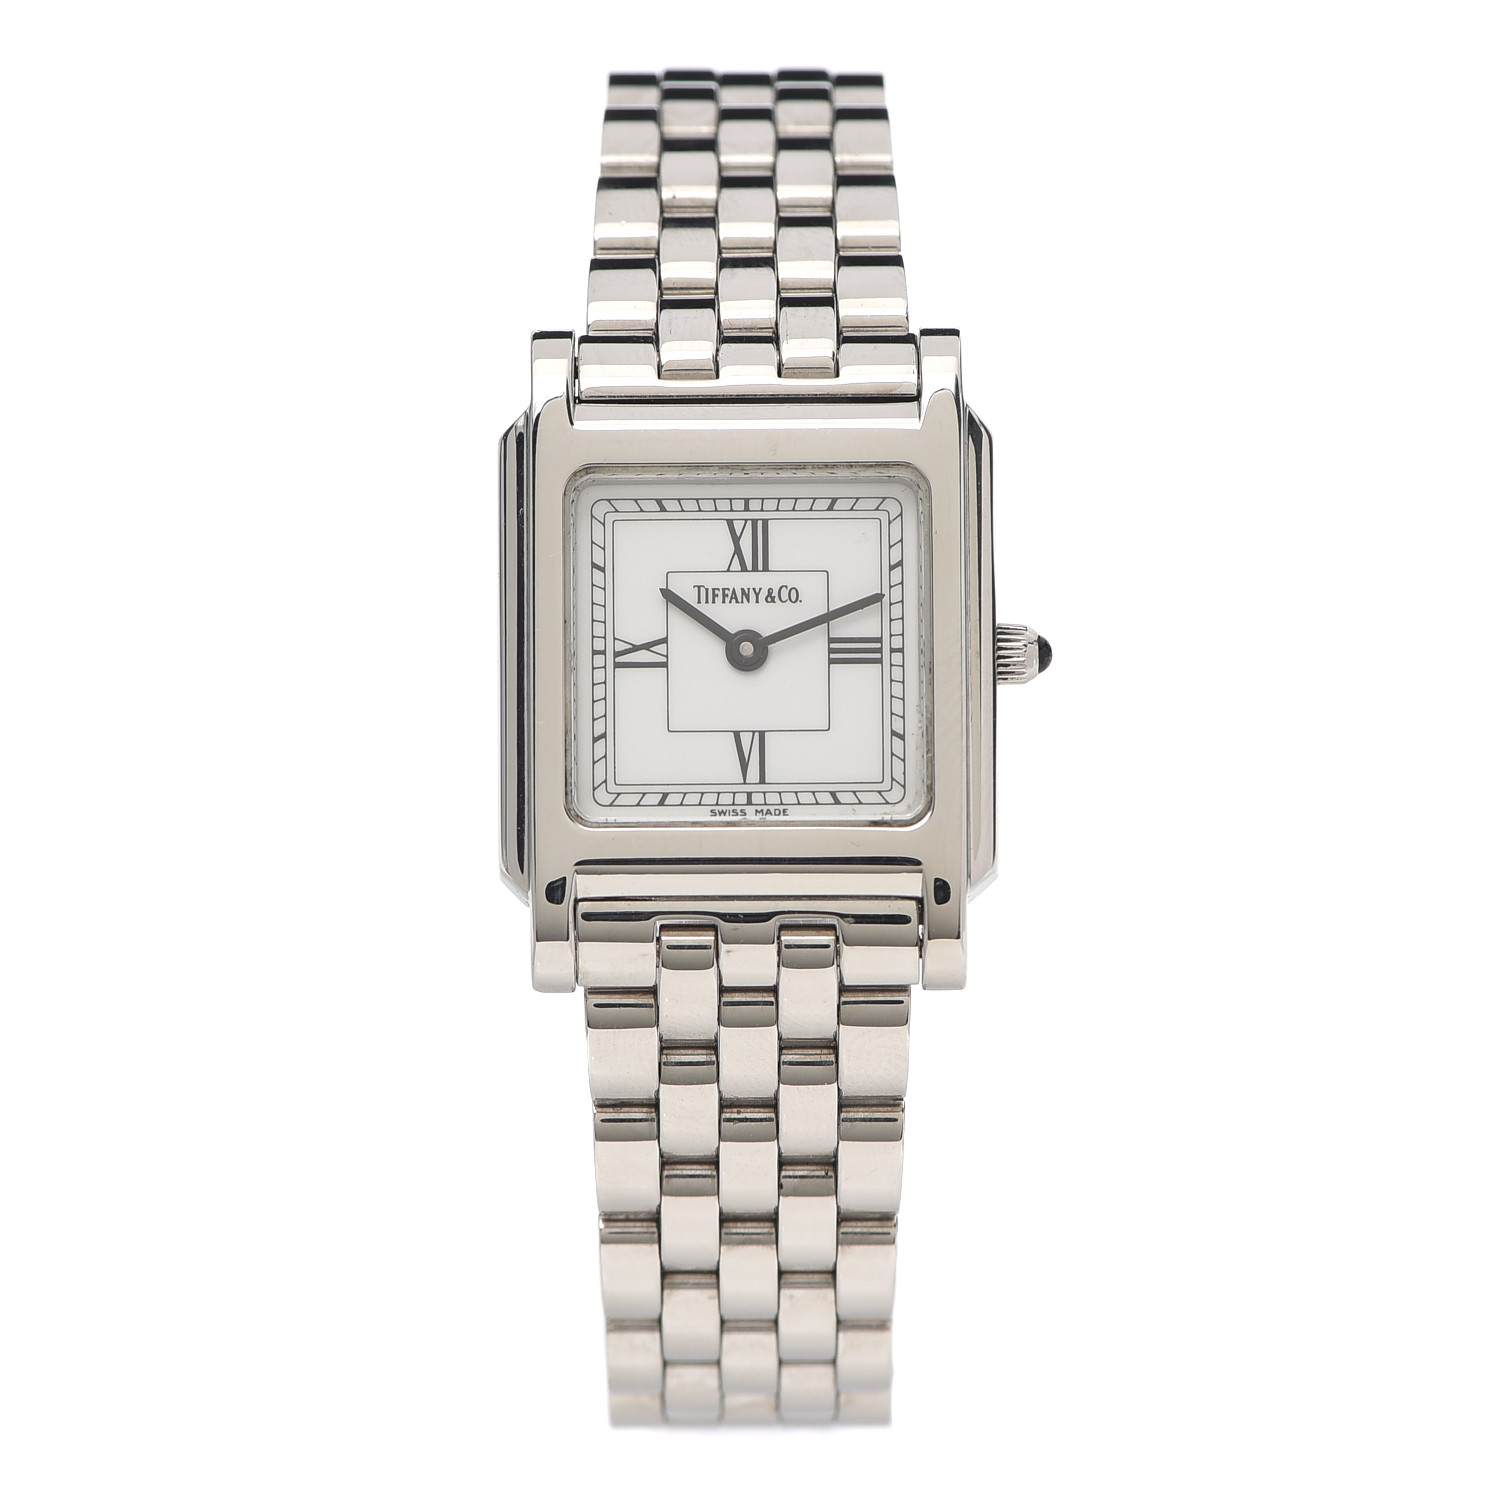 TIFFANY Stainless Steel 24mm Square Classic Quartz Watch 737438 ...